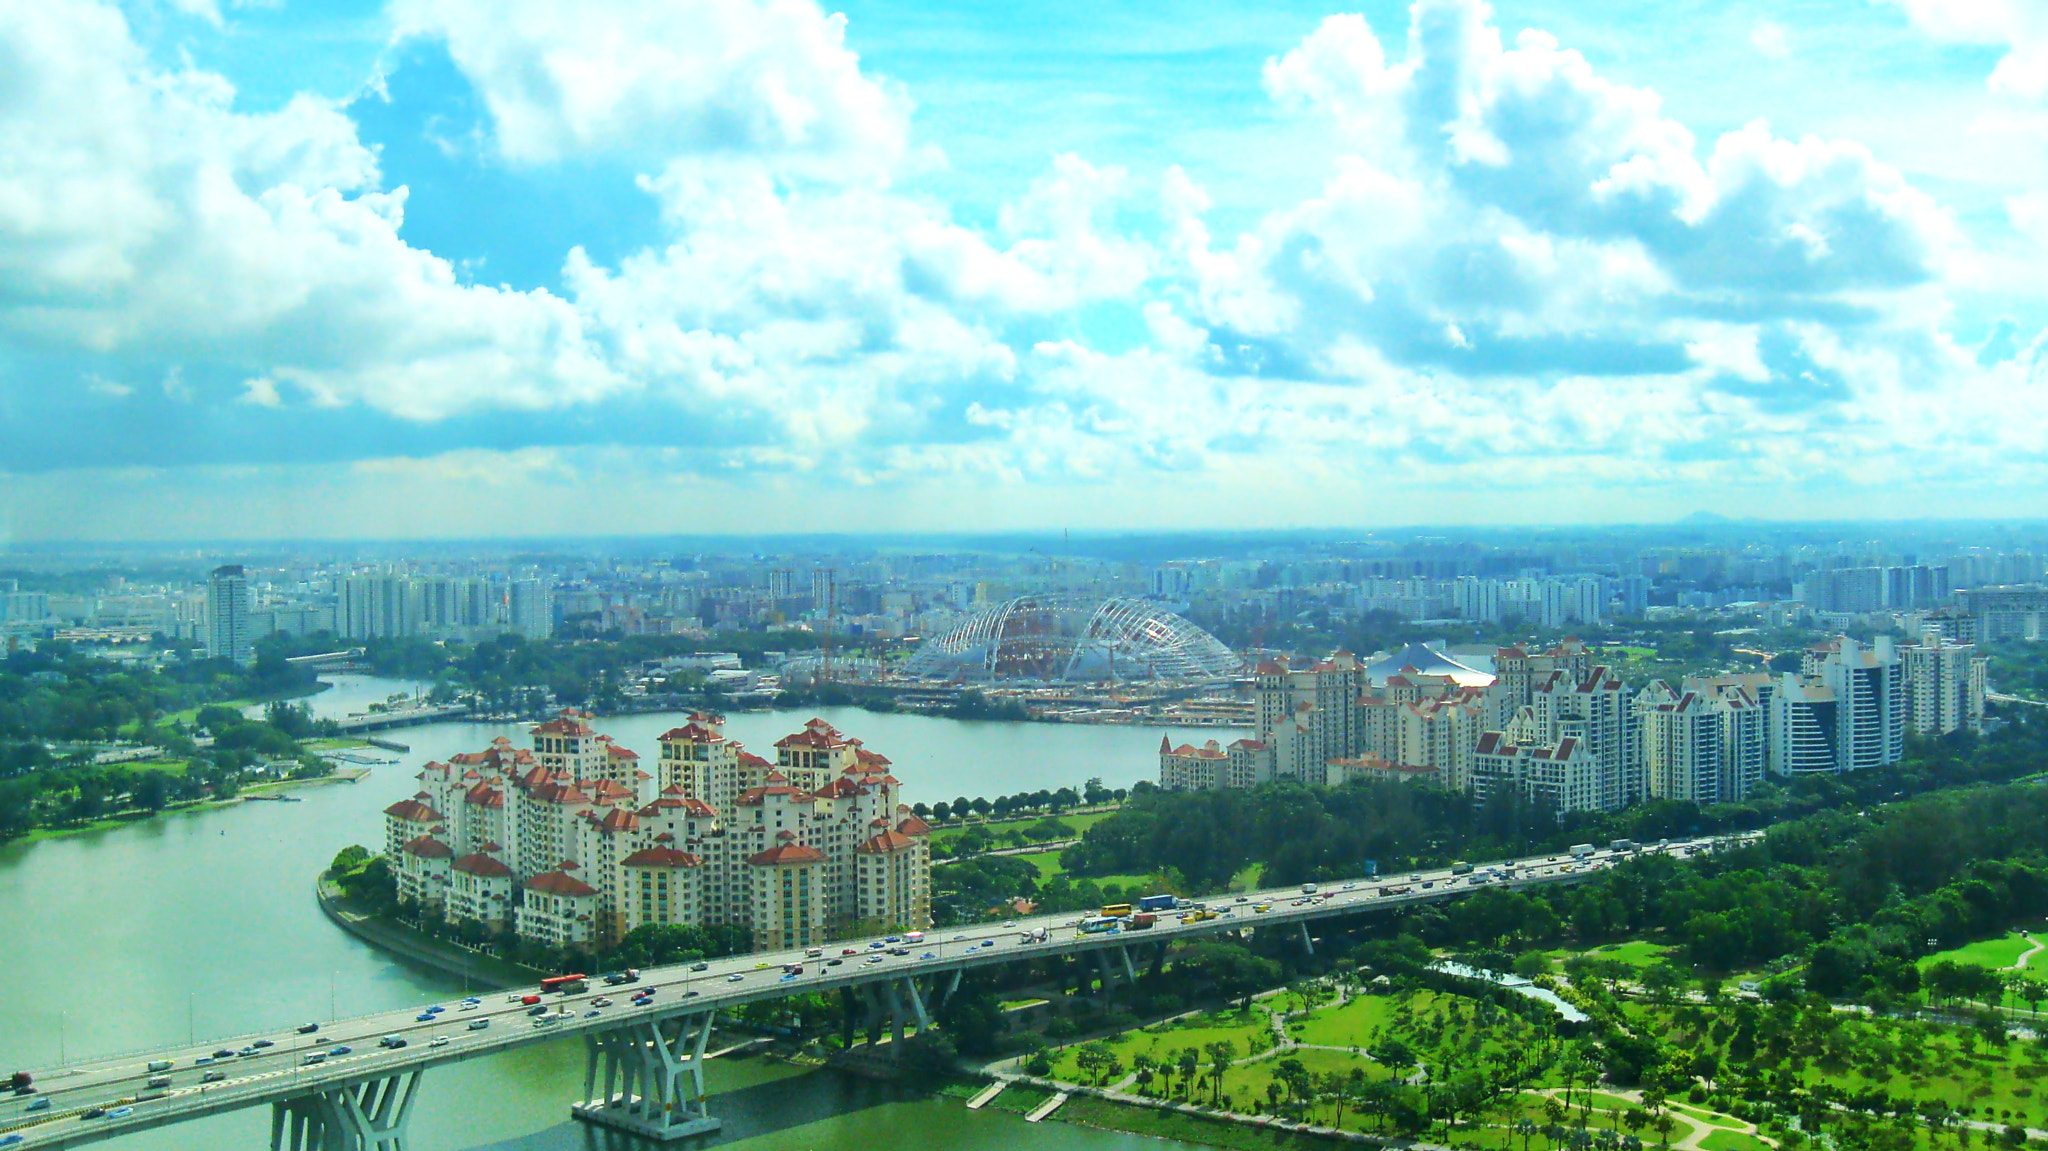 Canon PowerShot A3100 IS sample photo. Captured from singpore flyer- the breathtaking view of singapore city! photography